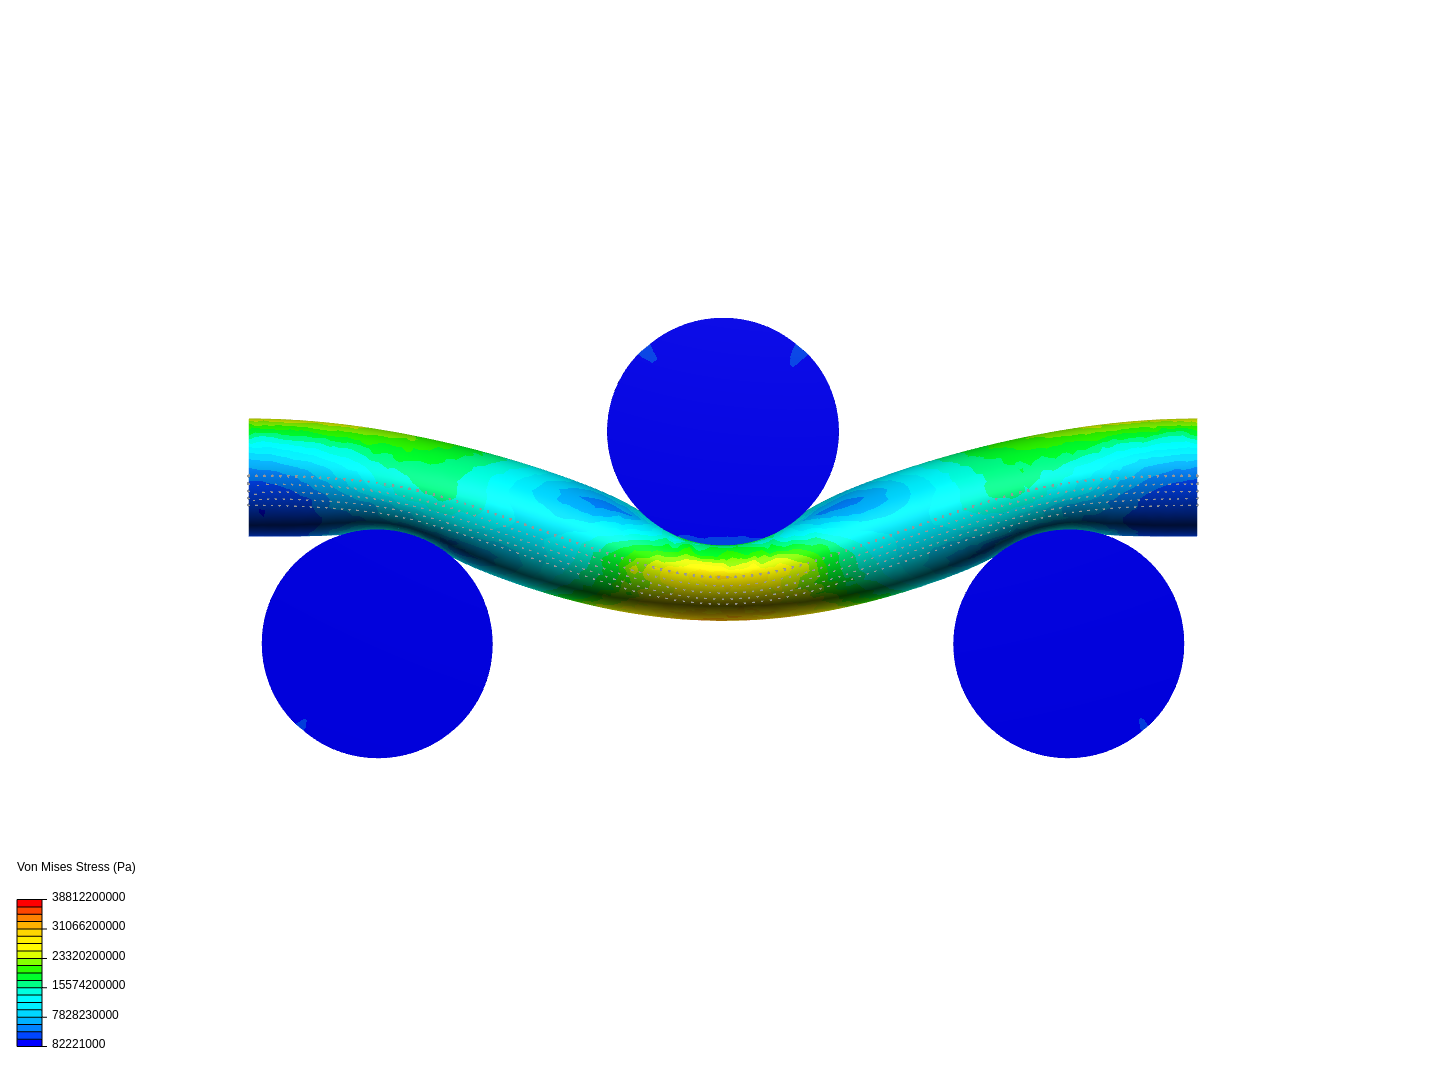 Pipe bending - SimScale Support image